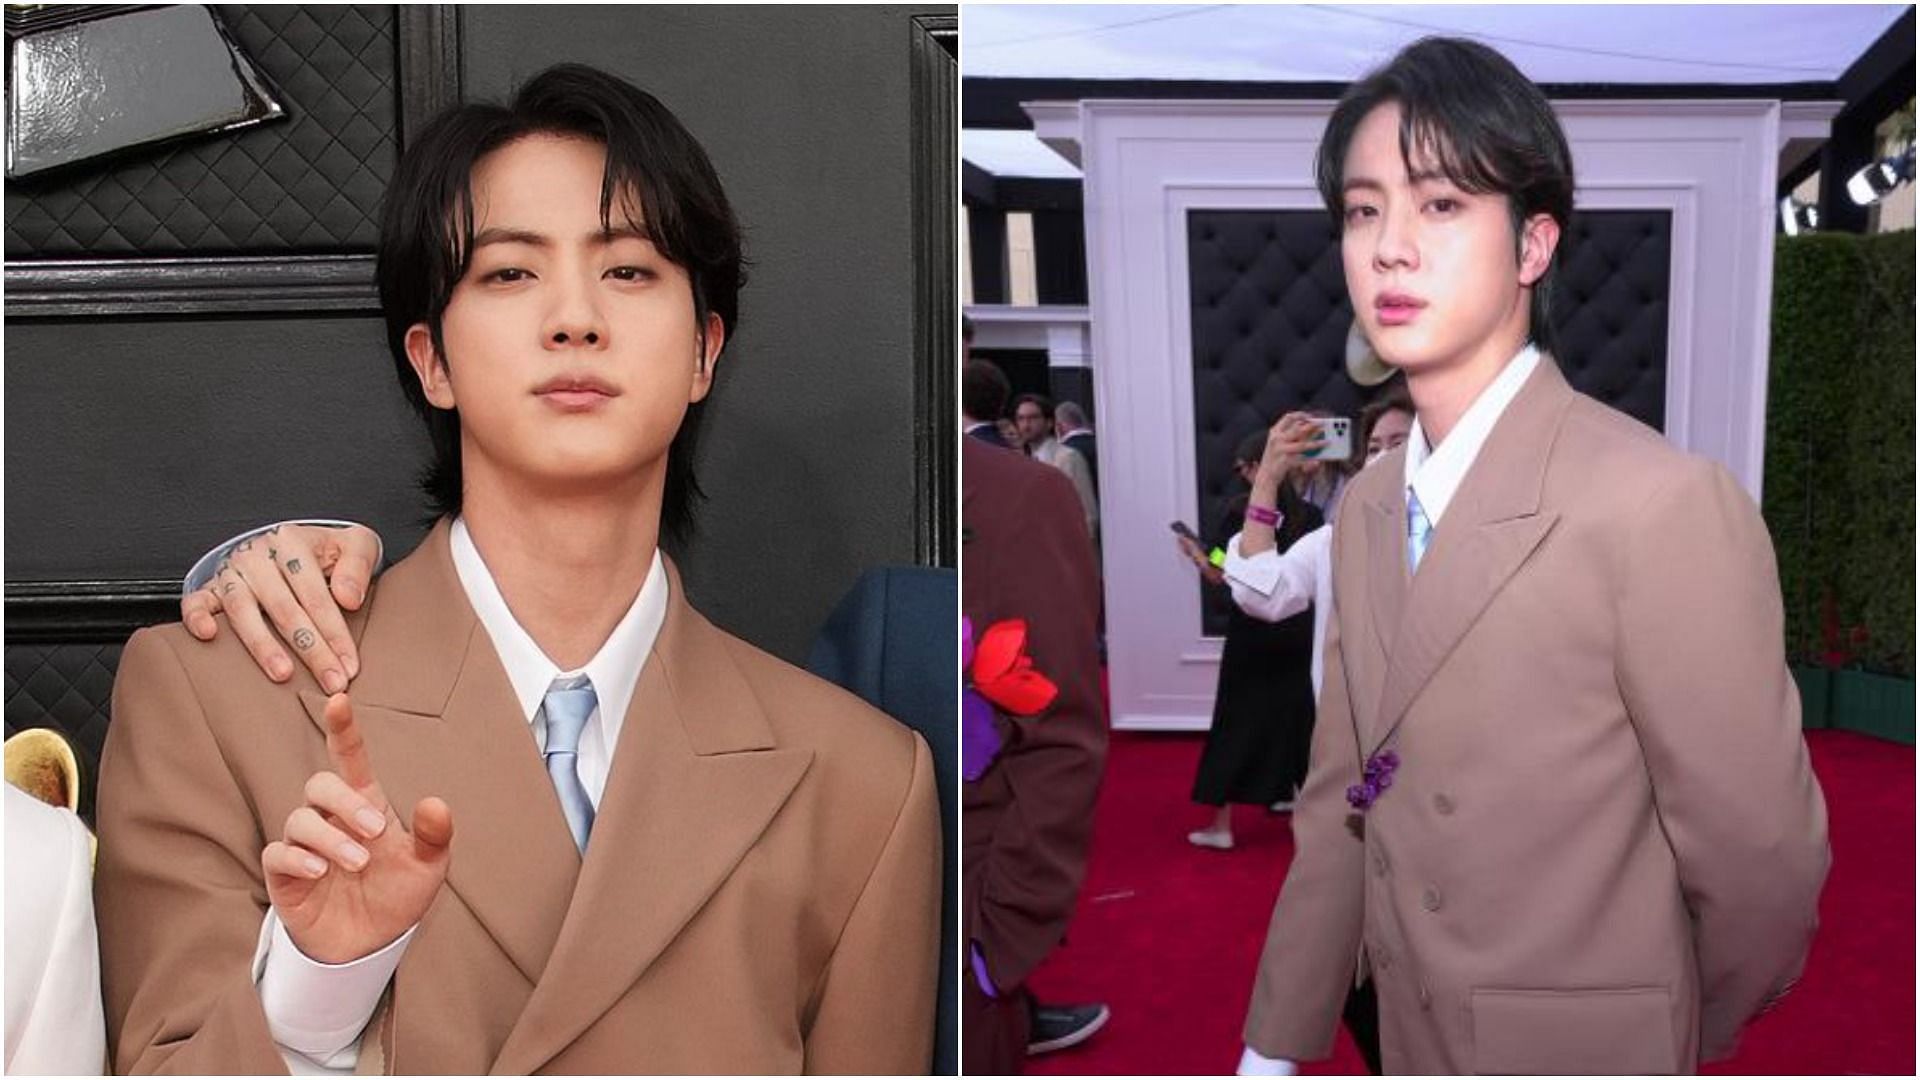 What do you think of Jin not being fully involved in the Grammy 2022  performance? Is this a sign of him leaving BTS? - Quora